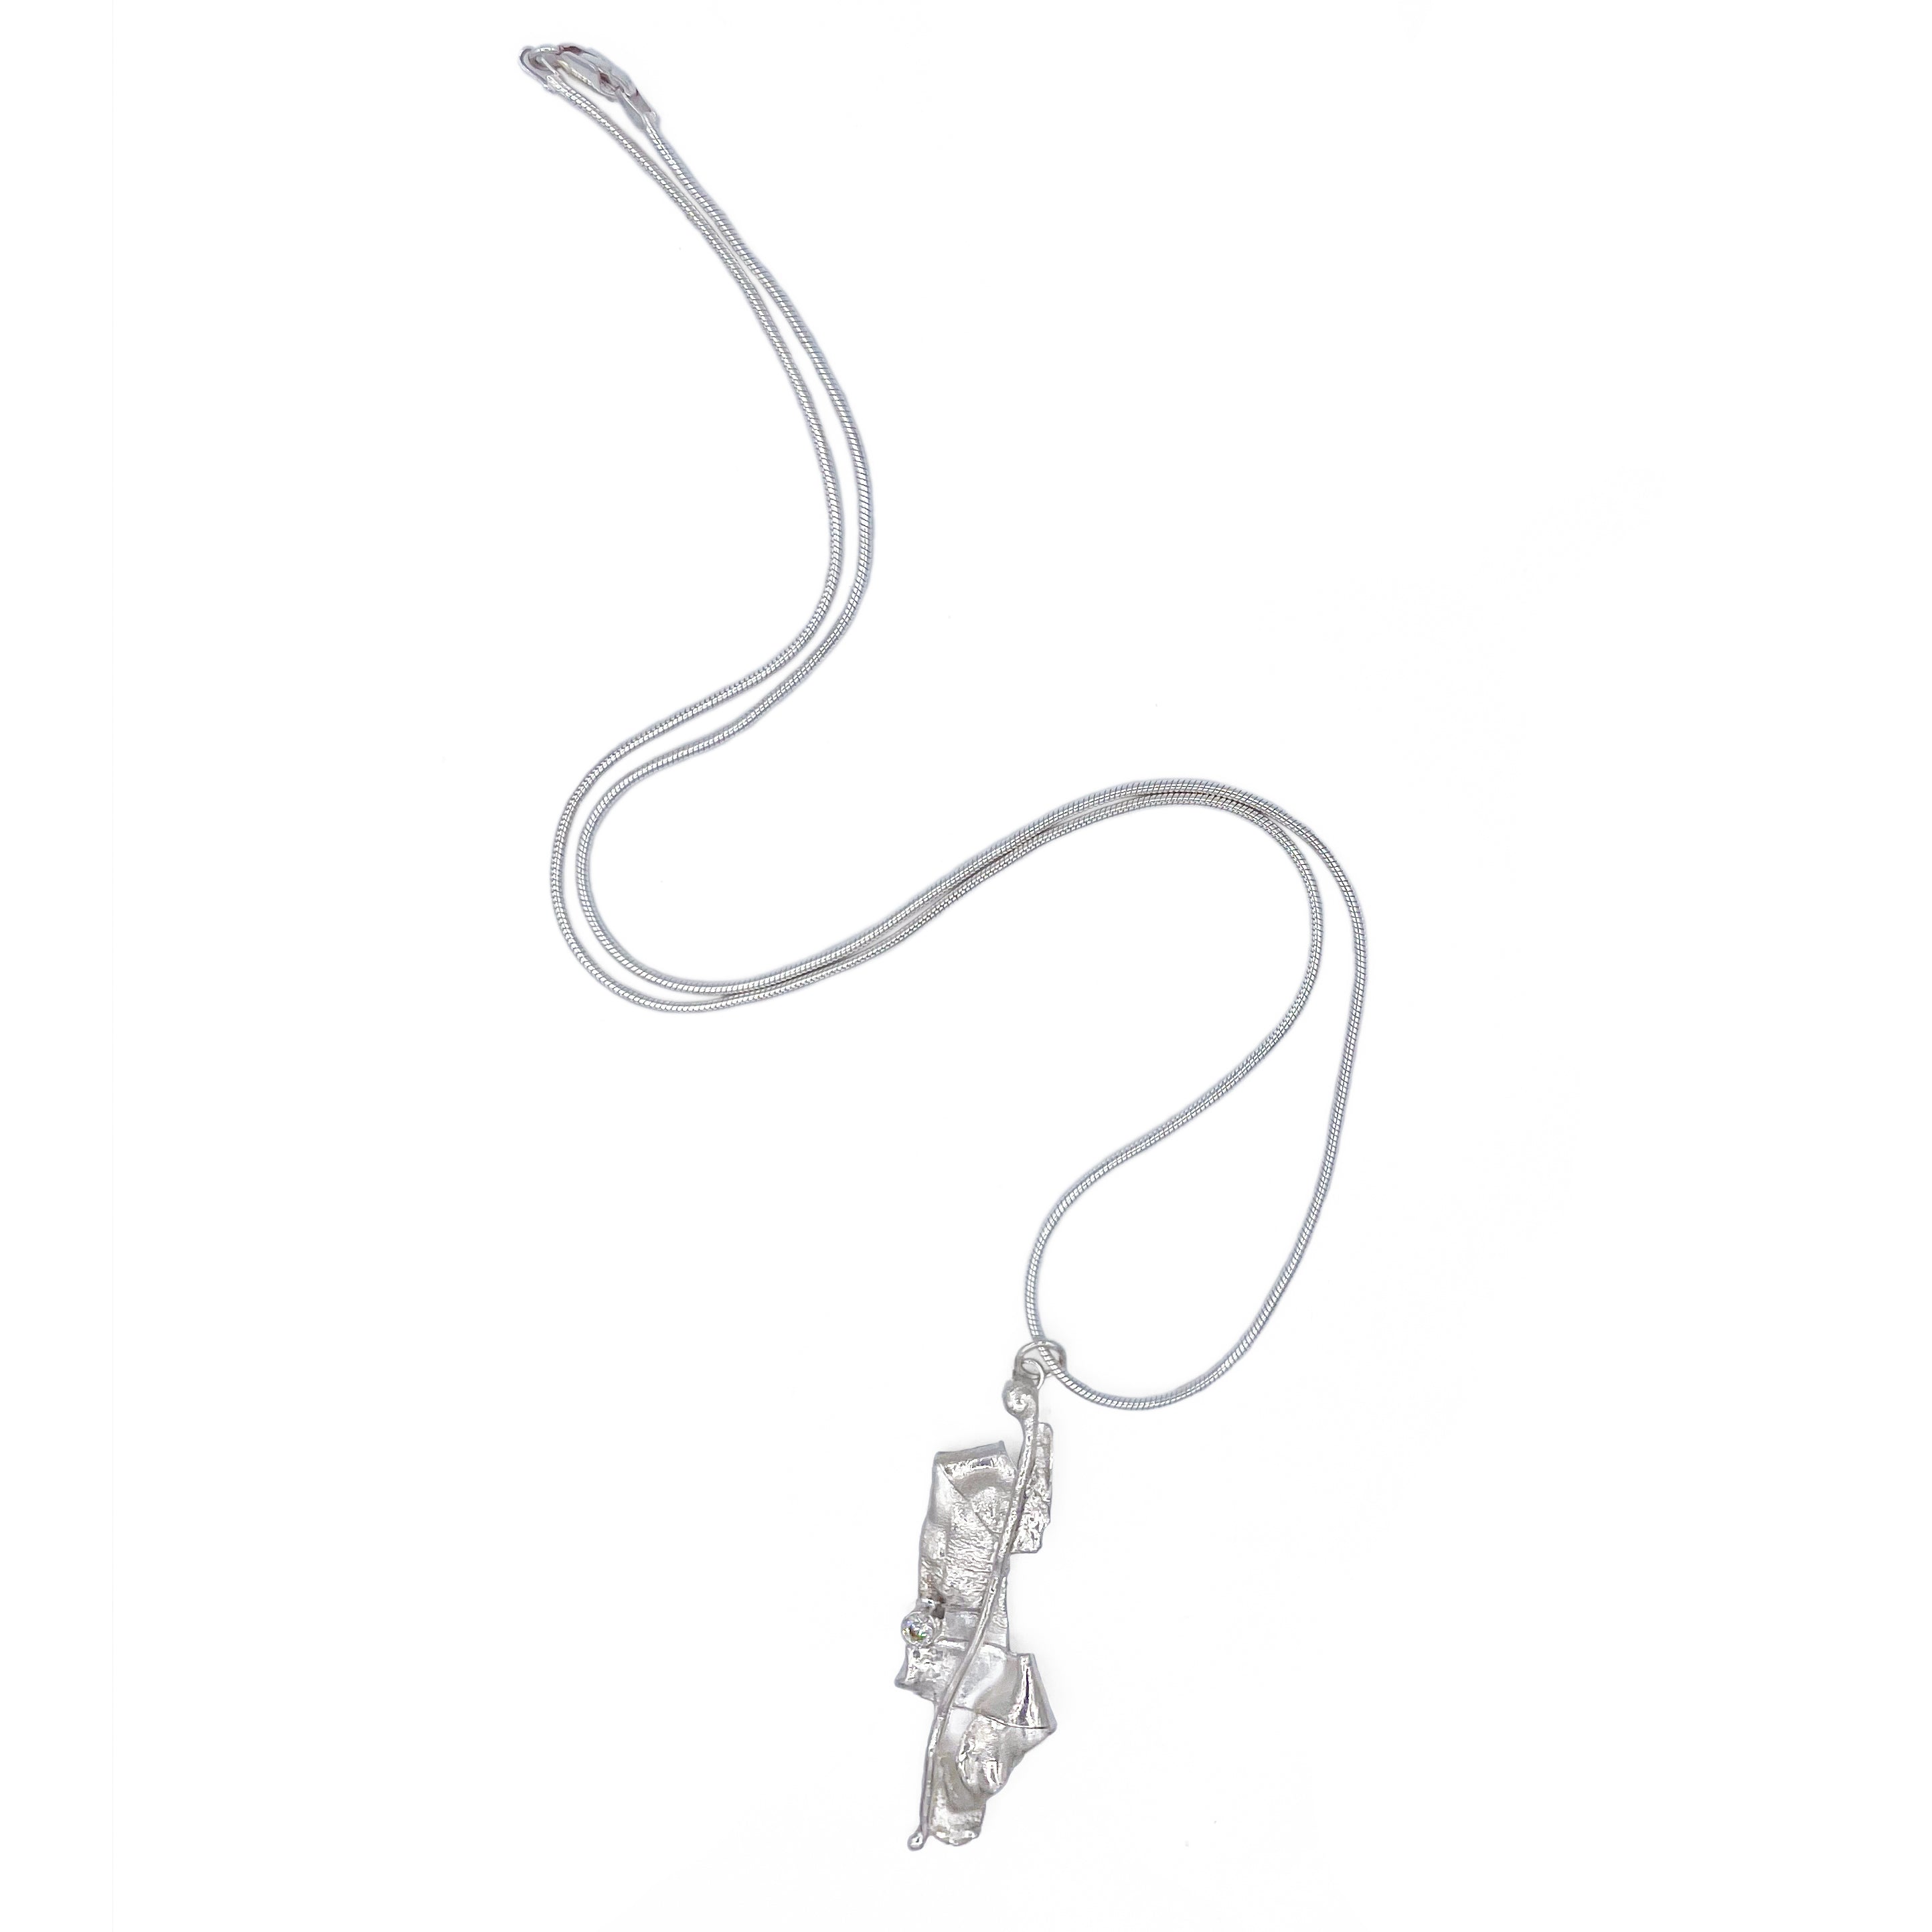 Sterling Silver Unlocked Charm Necklace – Gillian Trask